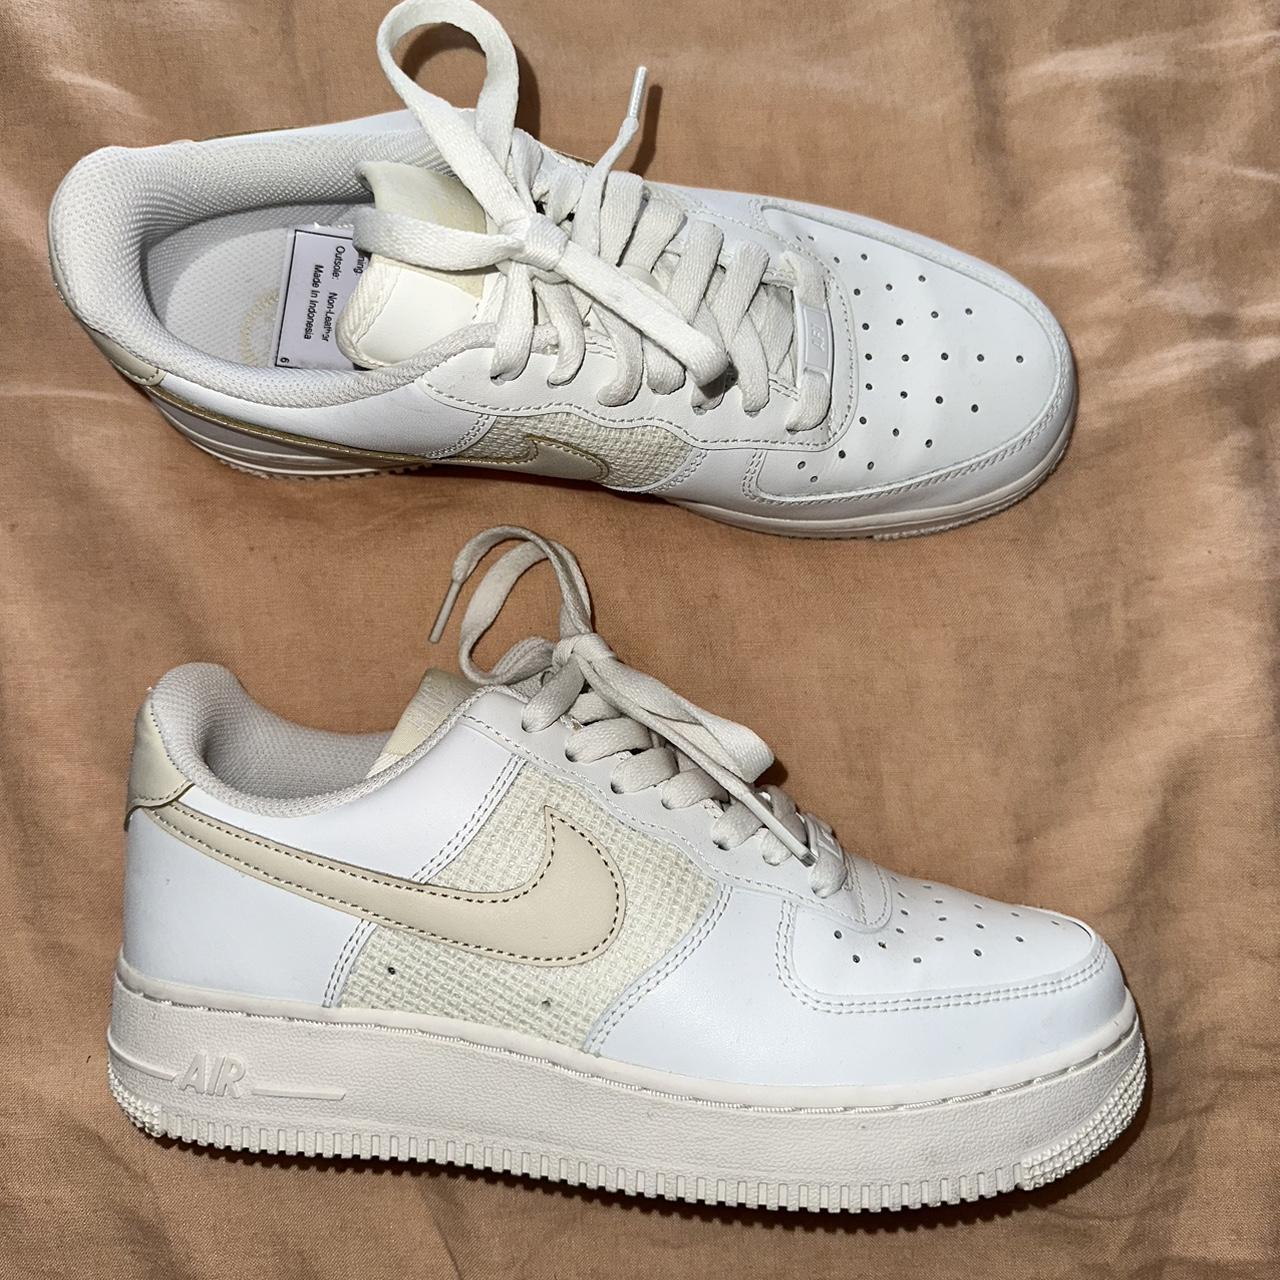 Nike Air force 1 ‘07 white / fossil womens 8 RRP... - Depop